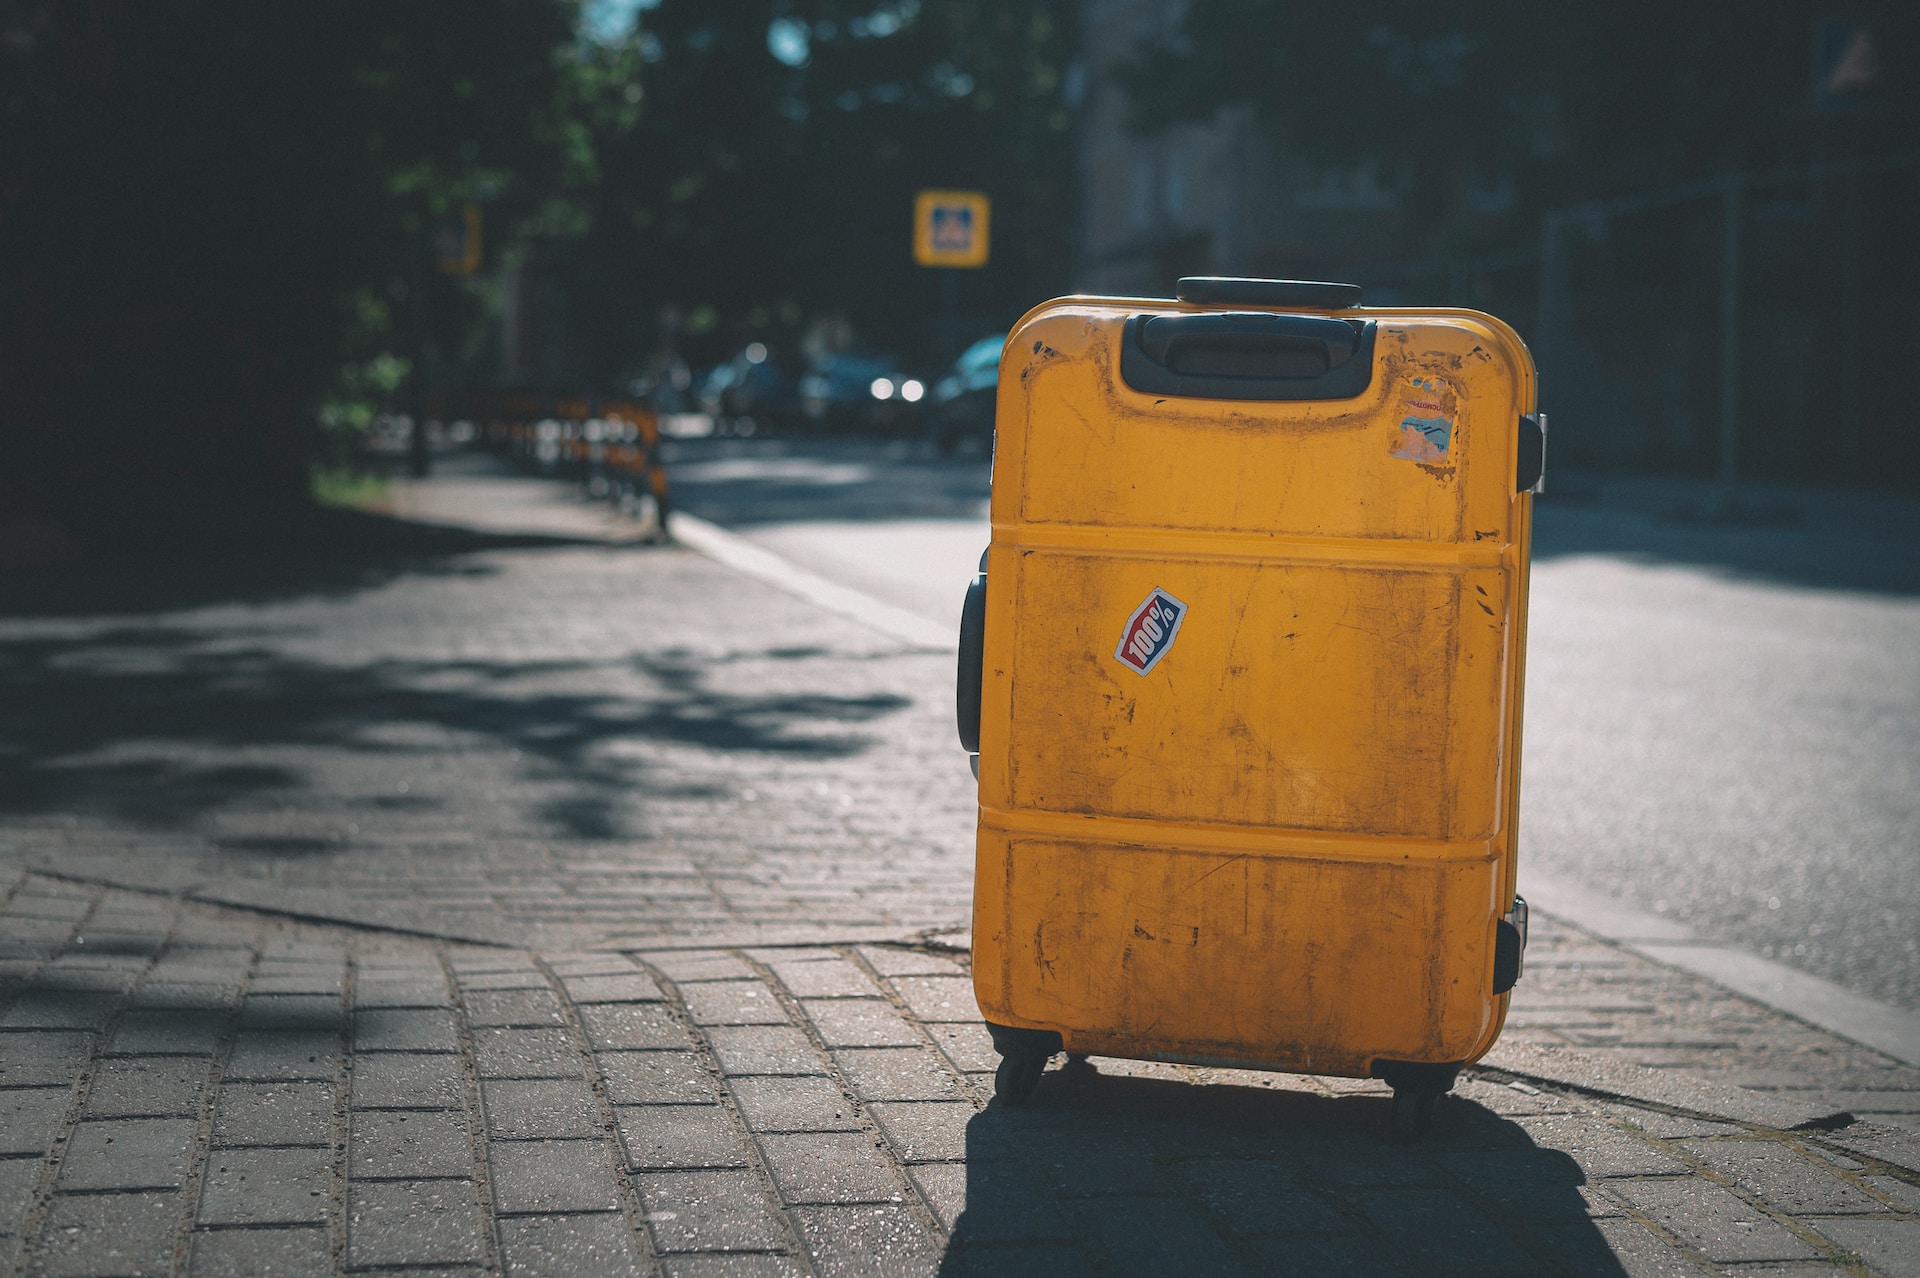 description: An image of a wheeled yellow suitcase, upright, on the sidewalk.  The backdrop of a city street is slightly out of focus.